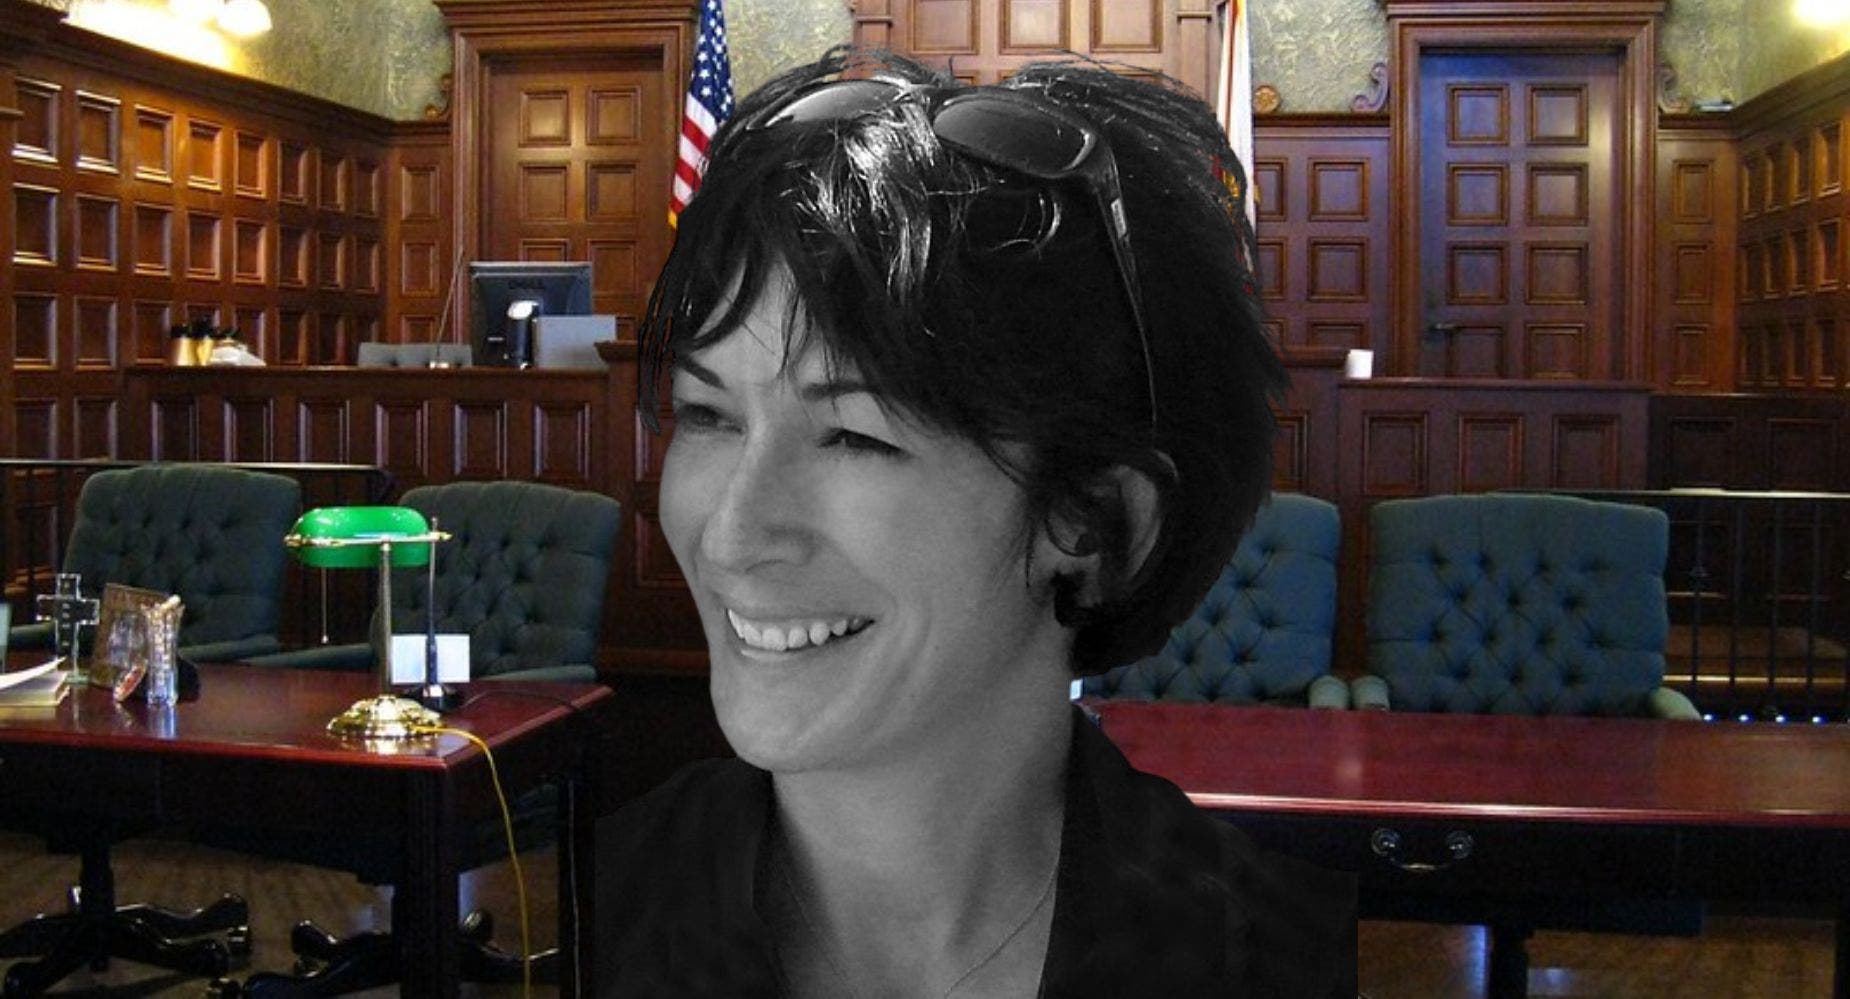 Ghislaine Maxwell Gets 20 Year Prison Sentence For Role In Sex Trafficking With Jeffrey Epstein